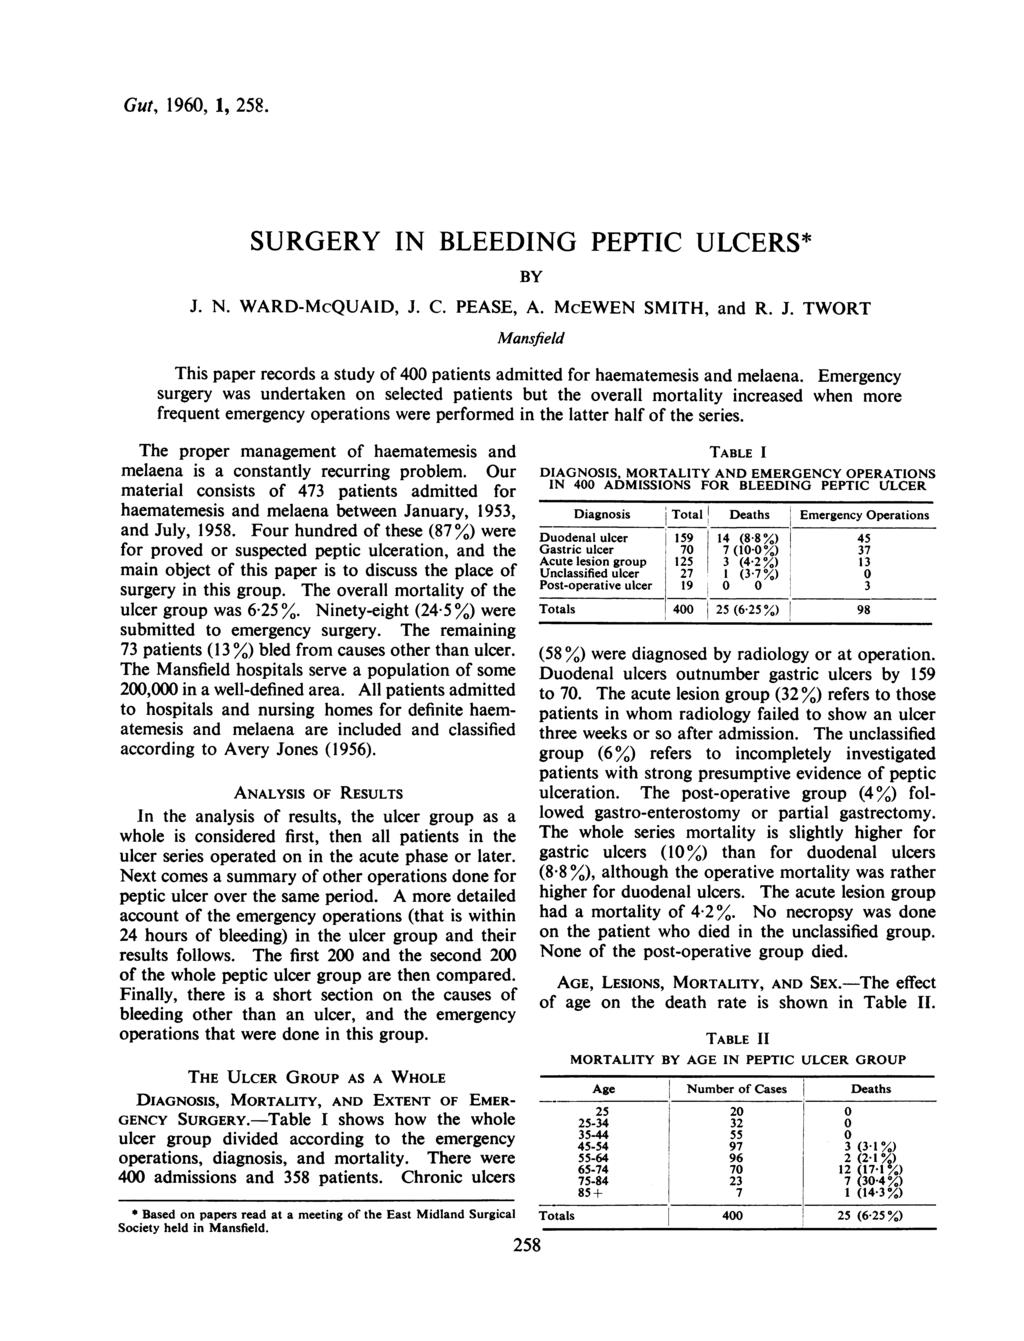 Gut, 1960, 1, 258. SURGERY IN BLEEDING PEPTIC ULCERS* BY J. N. WARD-McQUAID, J. C. PEASE, A. McEWEN SMITH, and R. J. TWORT Mansfield This paper records a study of 400 patients admitted for haematemesis and melaena.